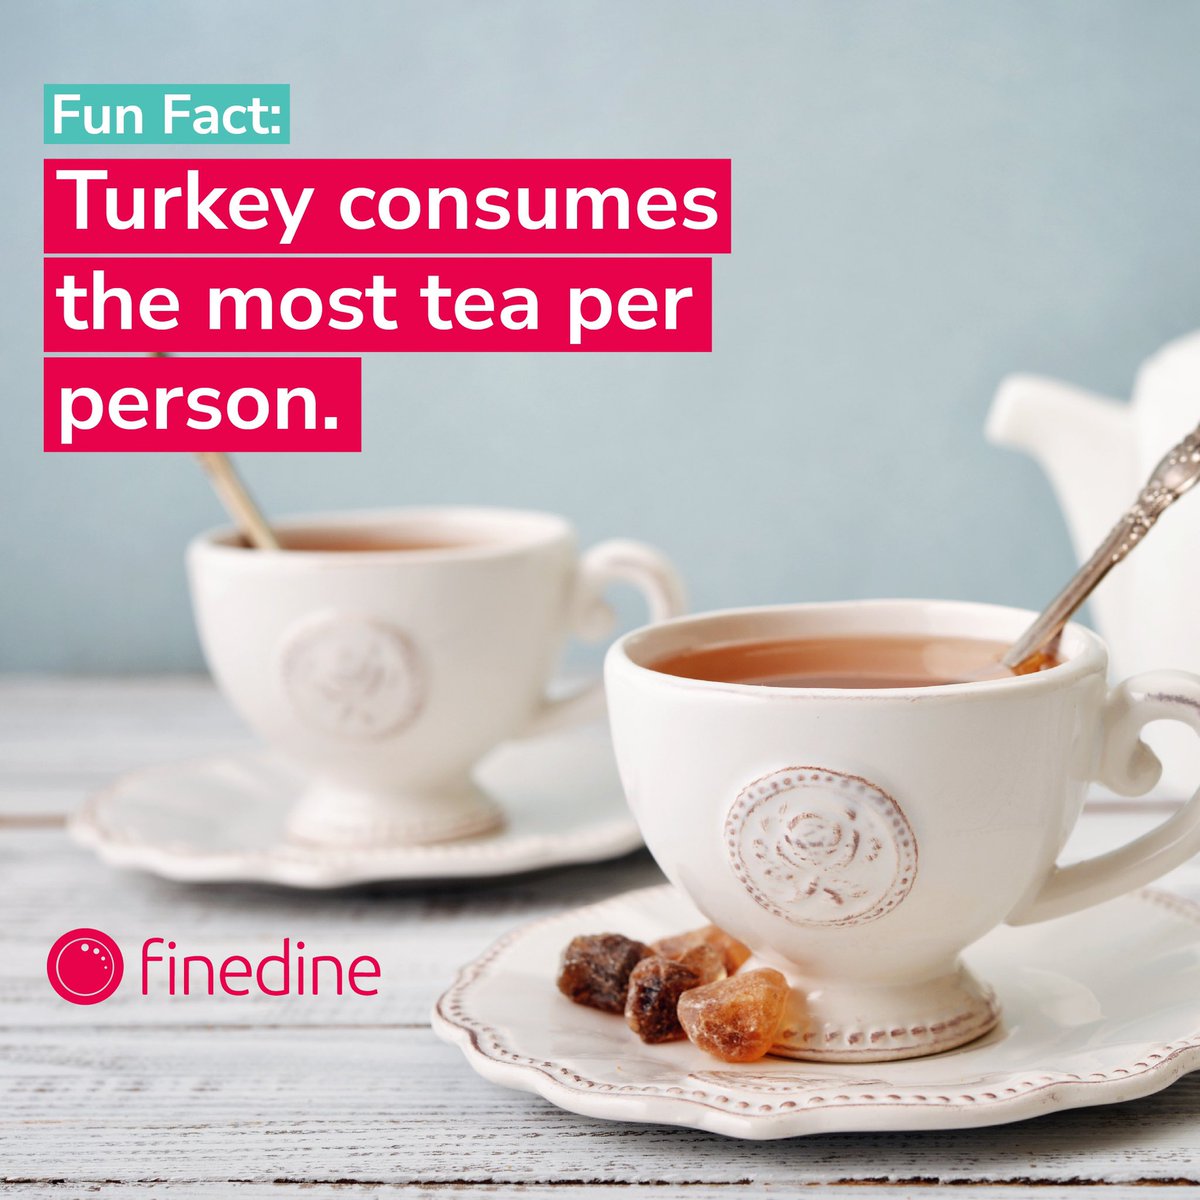 Your Welcome Wednesday is here! 🌟 Here is a fun fact for you. 👇🏻 Did you know Turkey consumes the most tea per person? 🍵 Although Turkish coffee is famous, tea is the bigger of the staples. Per capita, Turks drink almost 7 pounds of tea every year. #finedinemenu #qrmenu